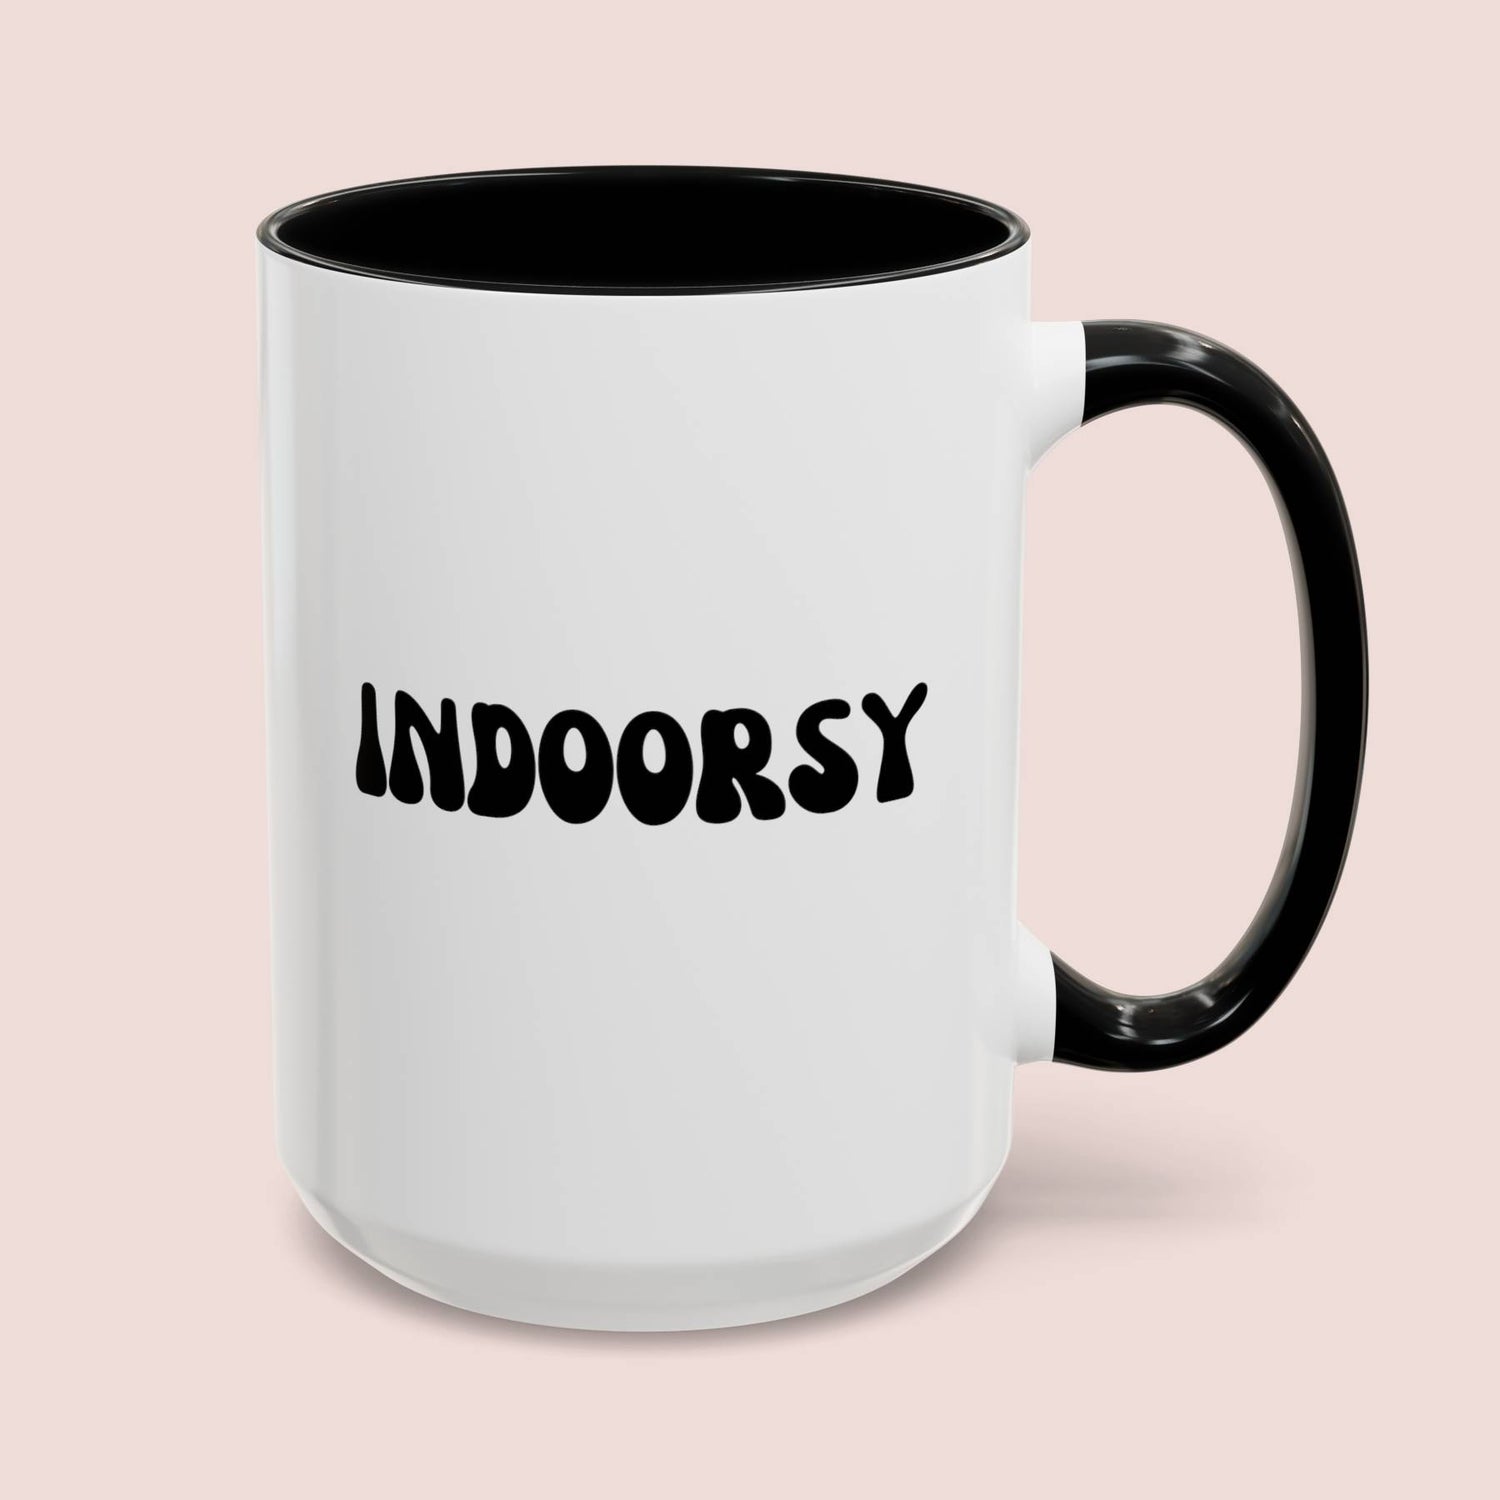 Indoorsy 15oz white with black accent funny large coffee mug gift for antisocial asocial cute introverts introvert her waveywares wavey wares wavywares wavy wares cover